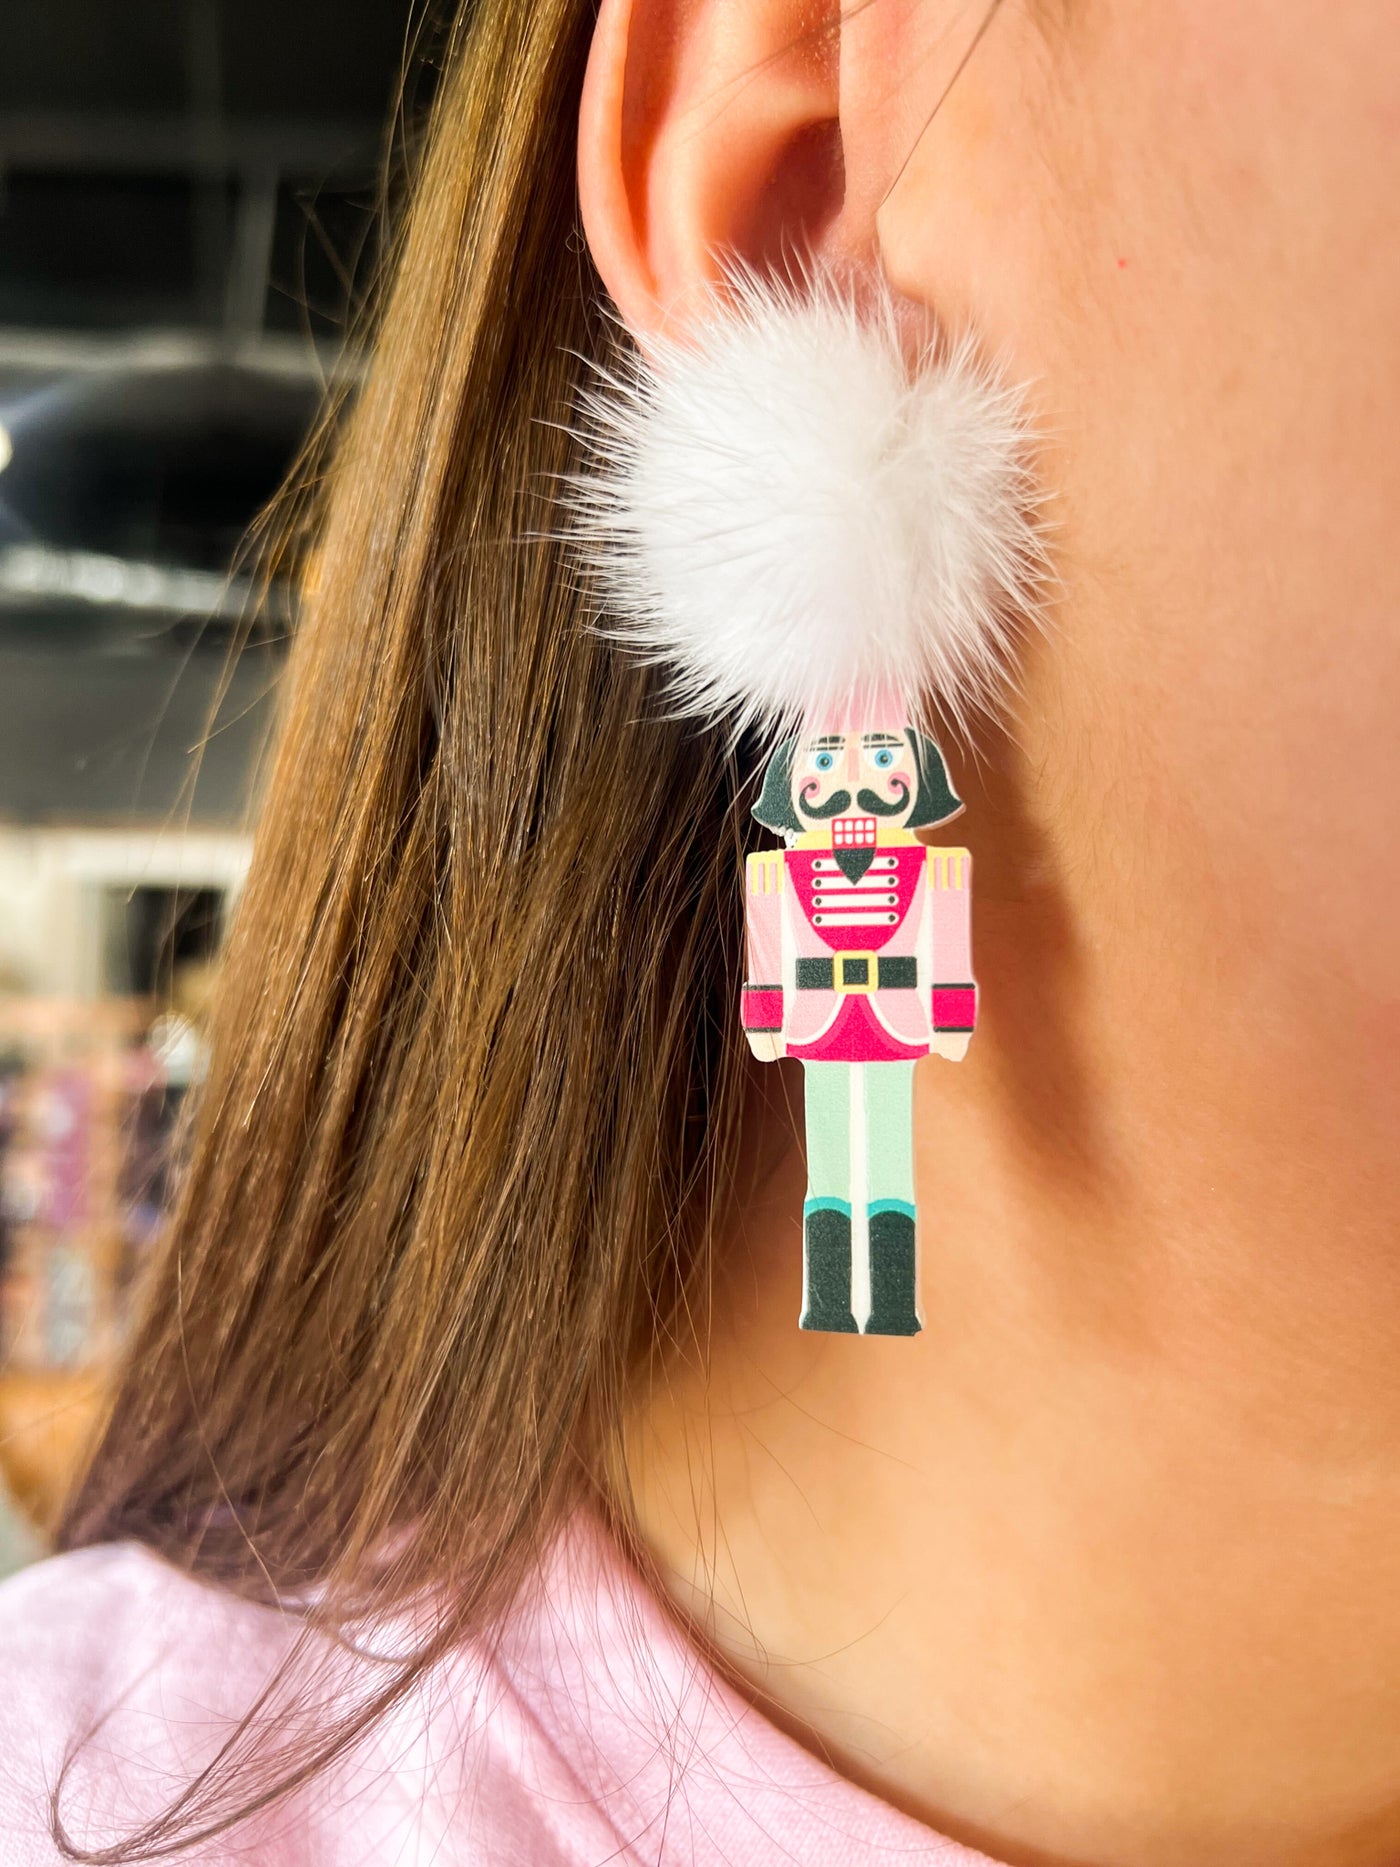 Son of a Nutcracker Earrings-190 - ACCESSORIES - JEWELRY-MARY KATHRYN DESIGN-[option4]-[option5]-[option6]-Leather & Lace Boutique Shop